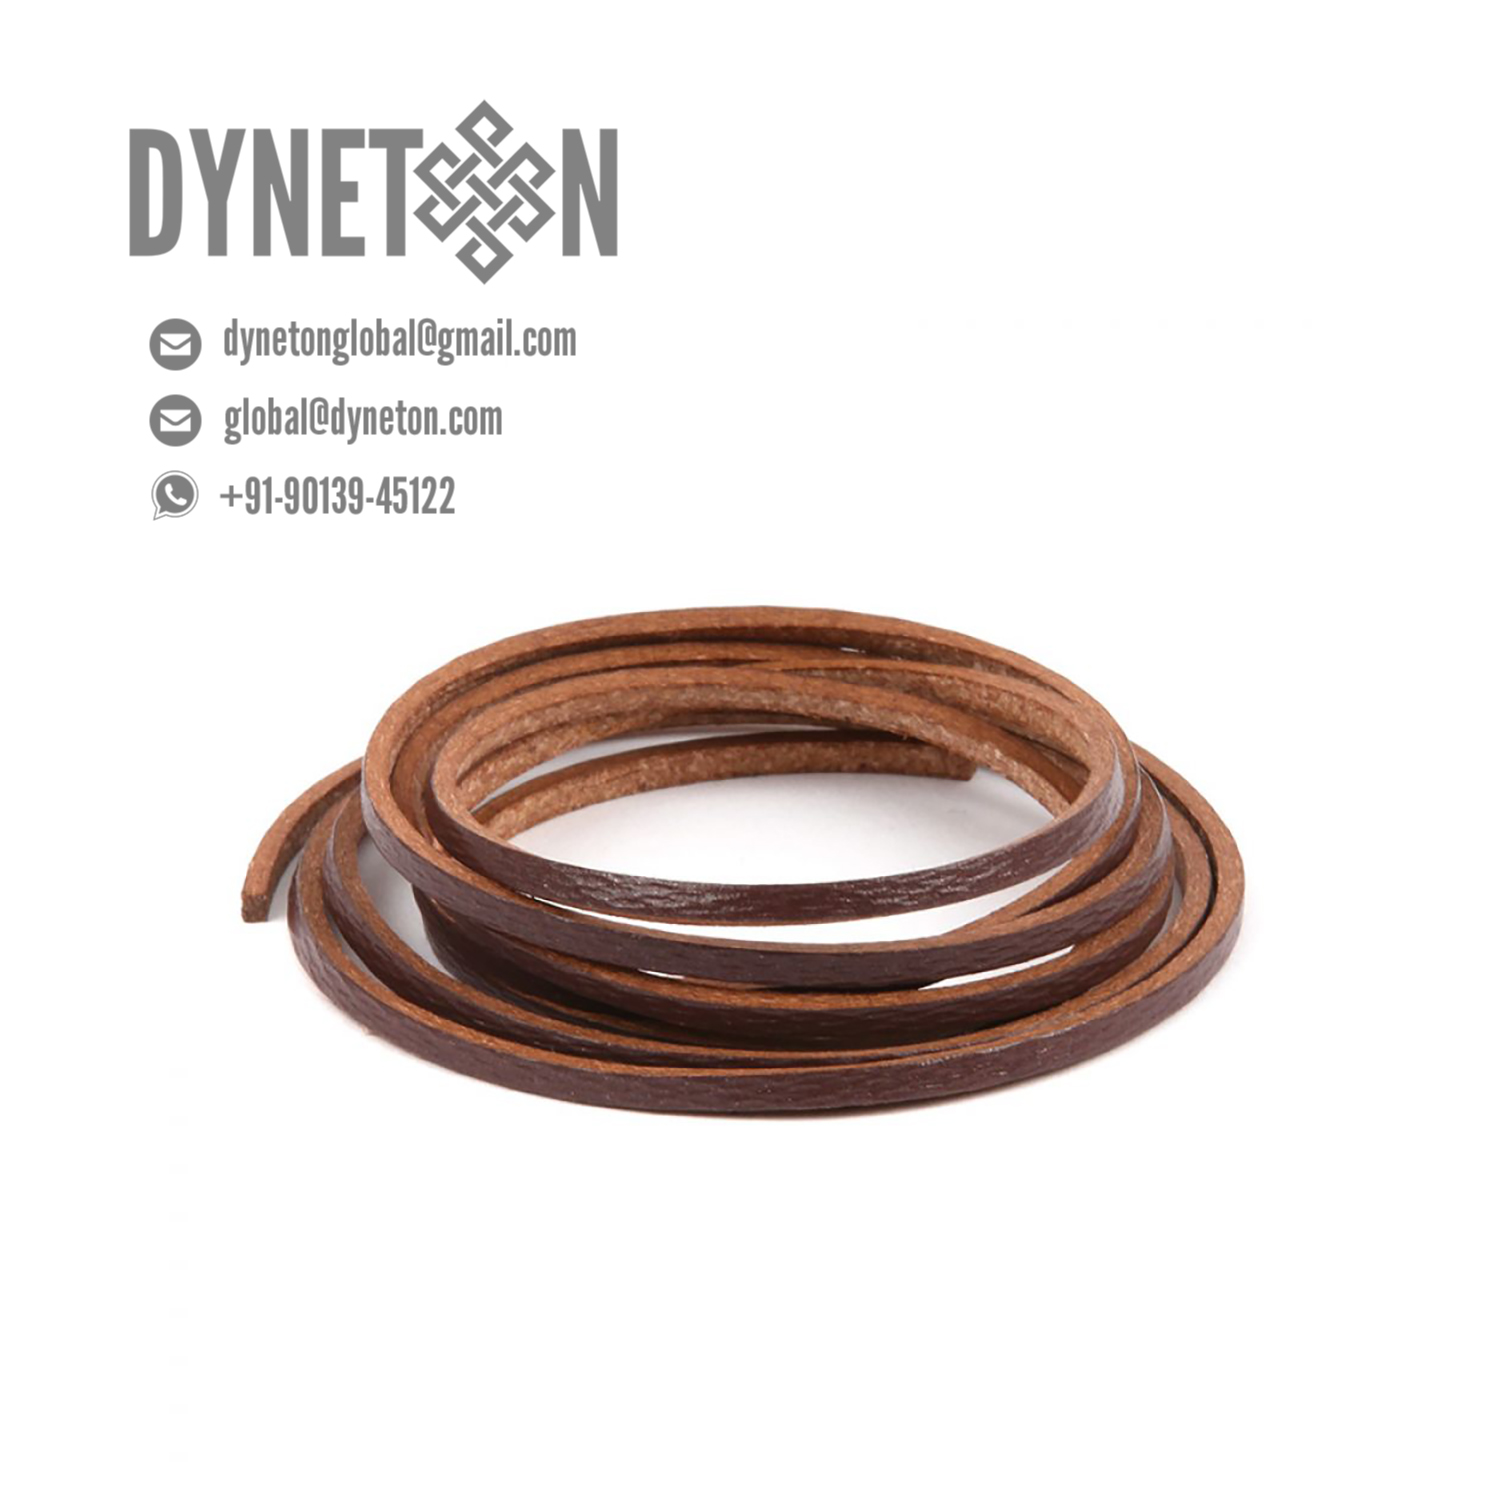 4mm Flat Leather Cord - DYNETON / Flat Leather Cords 4 mm